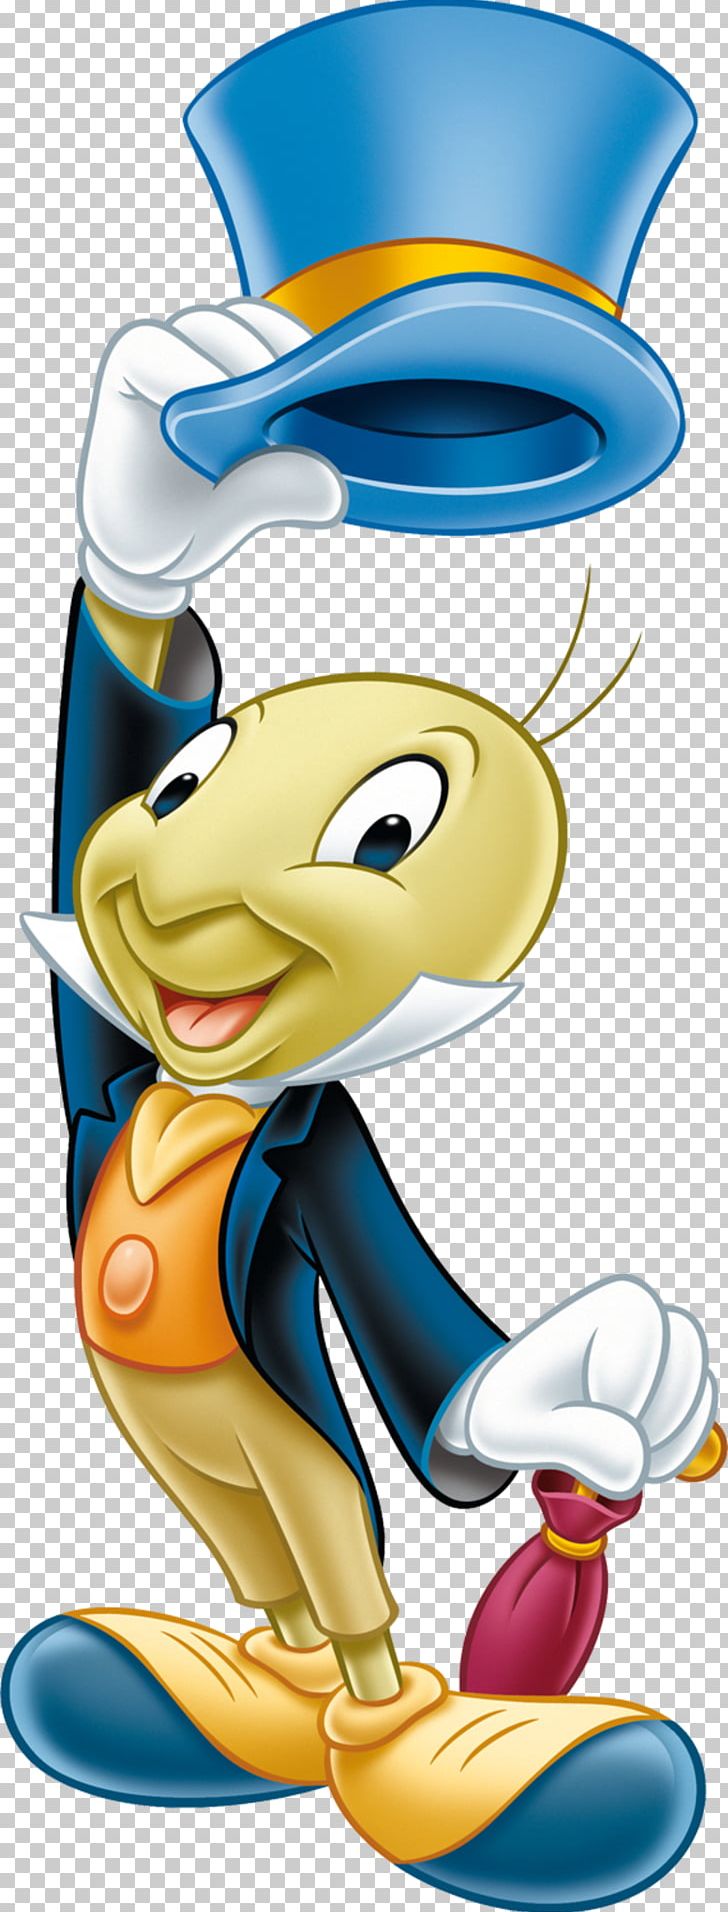 Jiminy Cricket Figaro The Talking Crickett Geppetto The Fairy With Turquoise Hair PNG, Clipart, Art, Cartoon, Cartoon Cricket Singer, Character, Cricket Free PNG Download